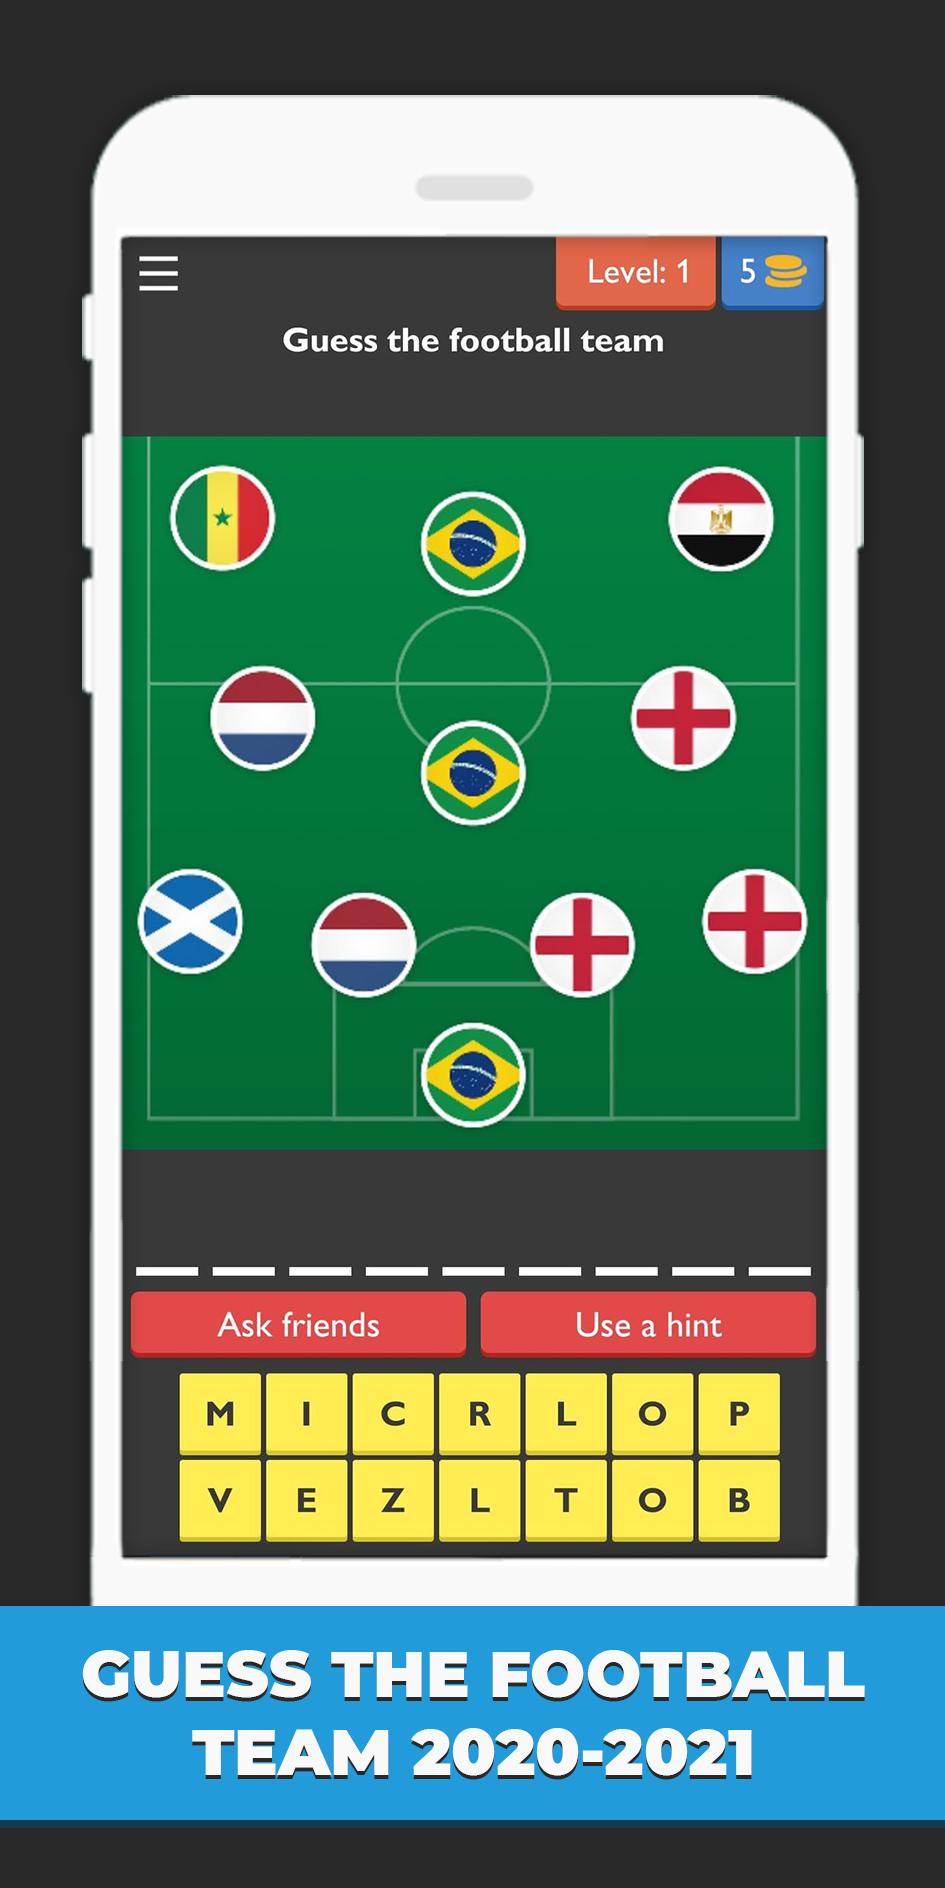 Team - Football Quiz for Android - APK